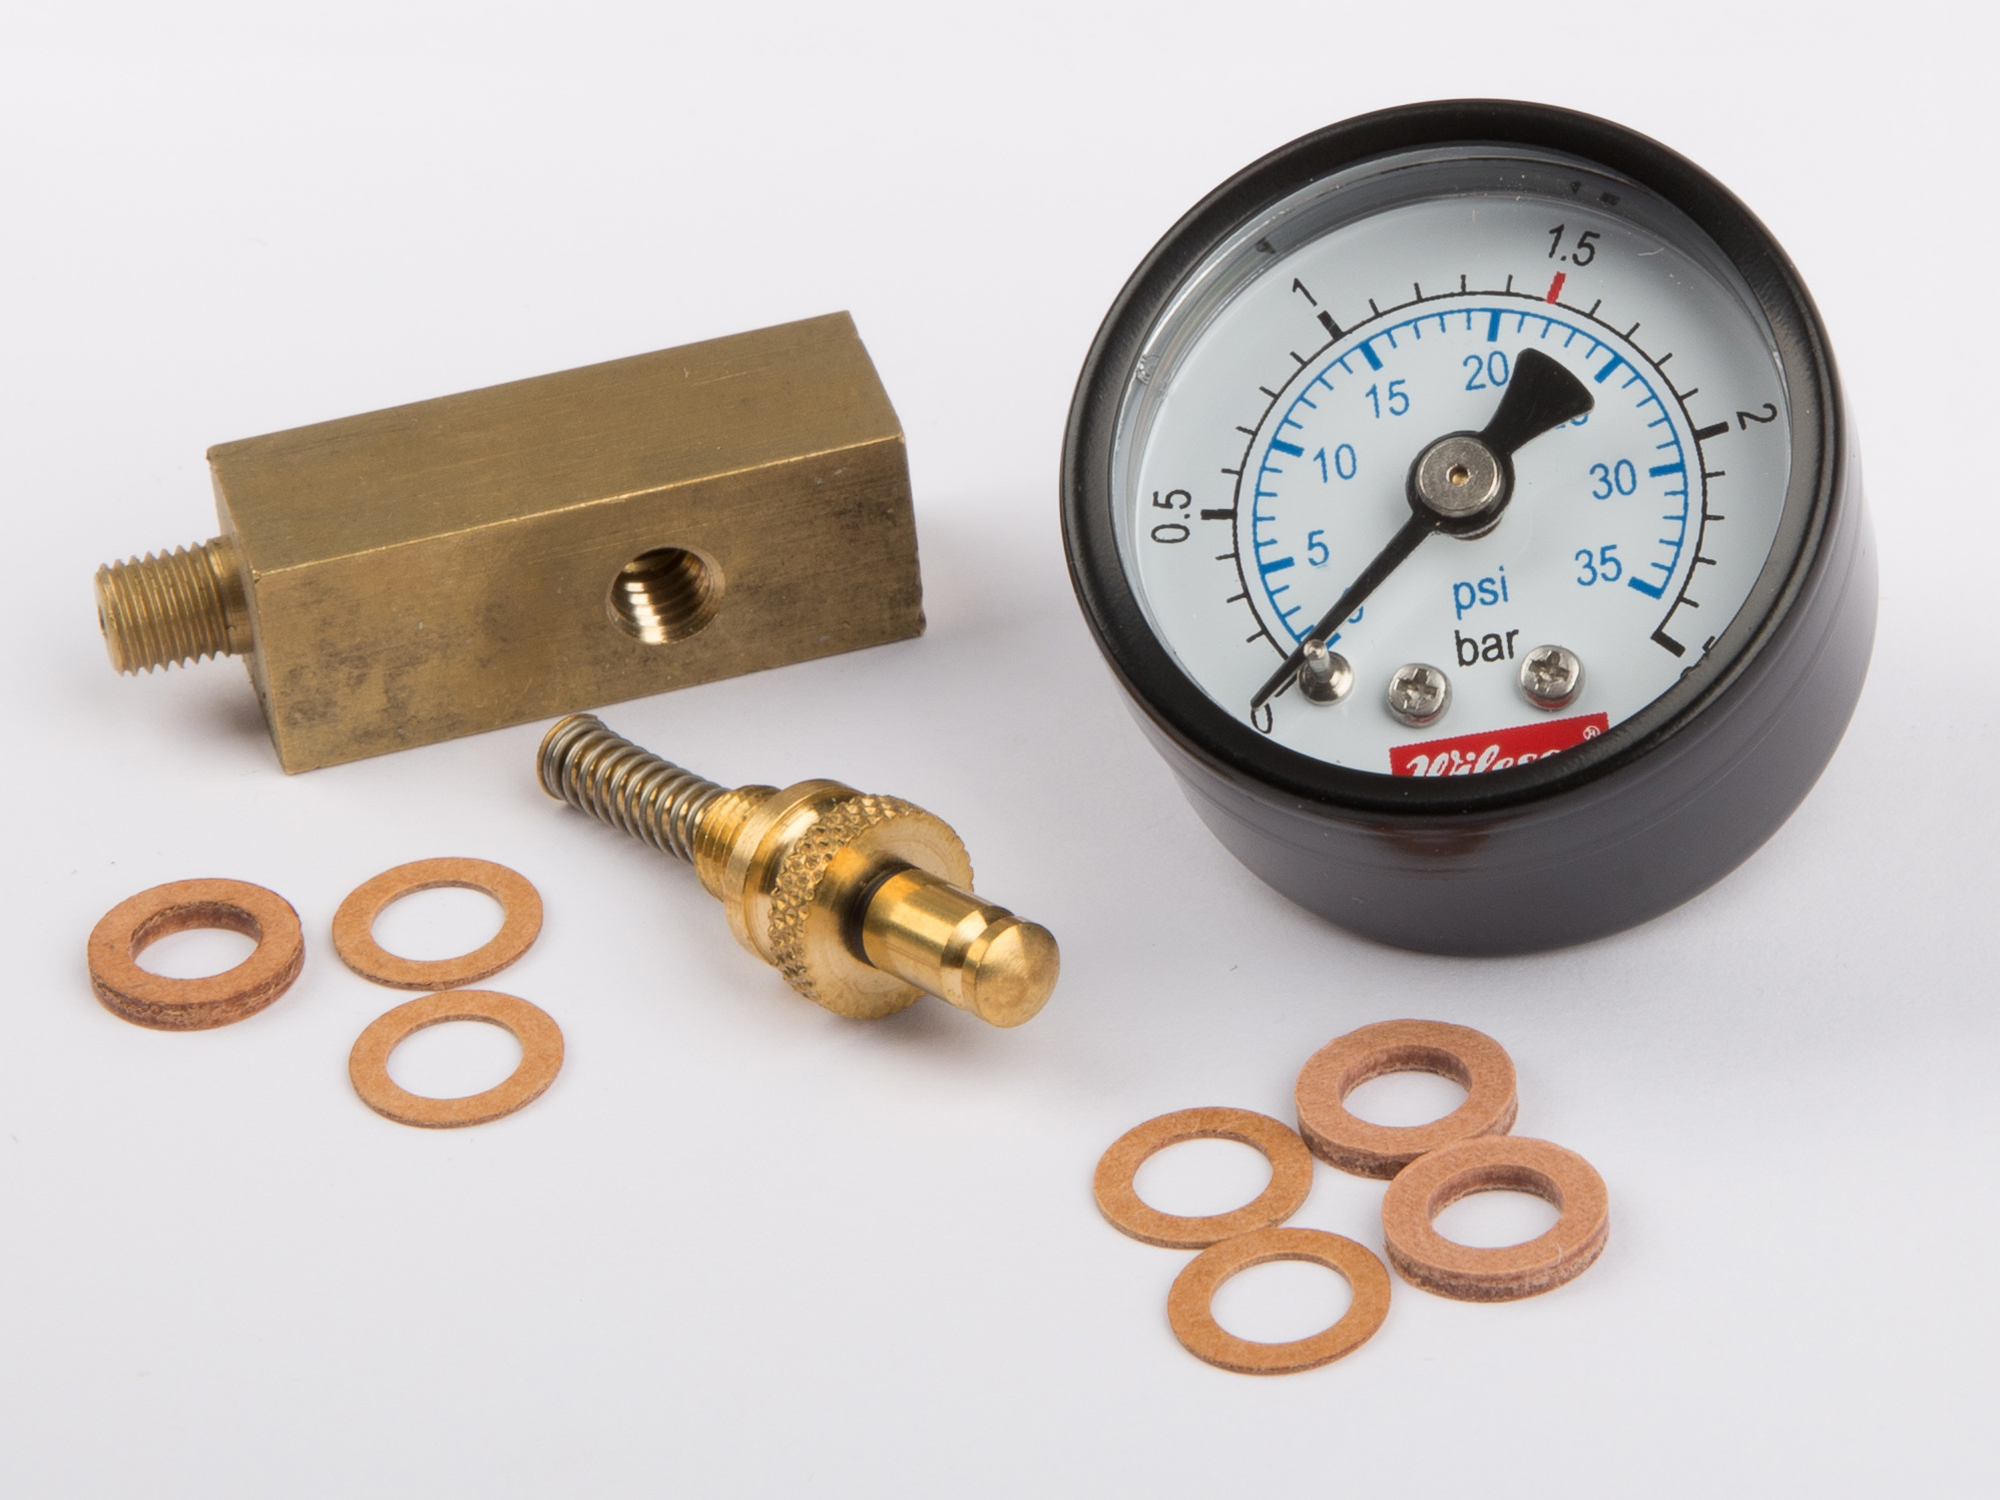 Manometer base, brass, 12 x 12 mm, thread connecting piece M6 x 0,75, spring loaded valve and manometer D15, D21, D320